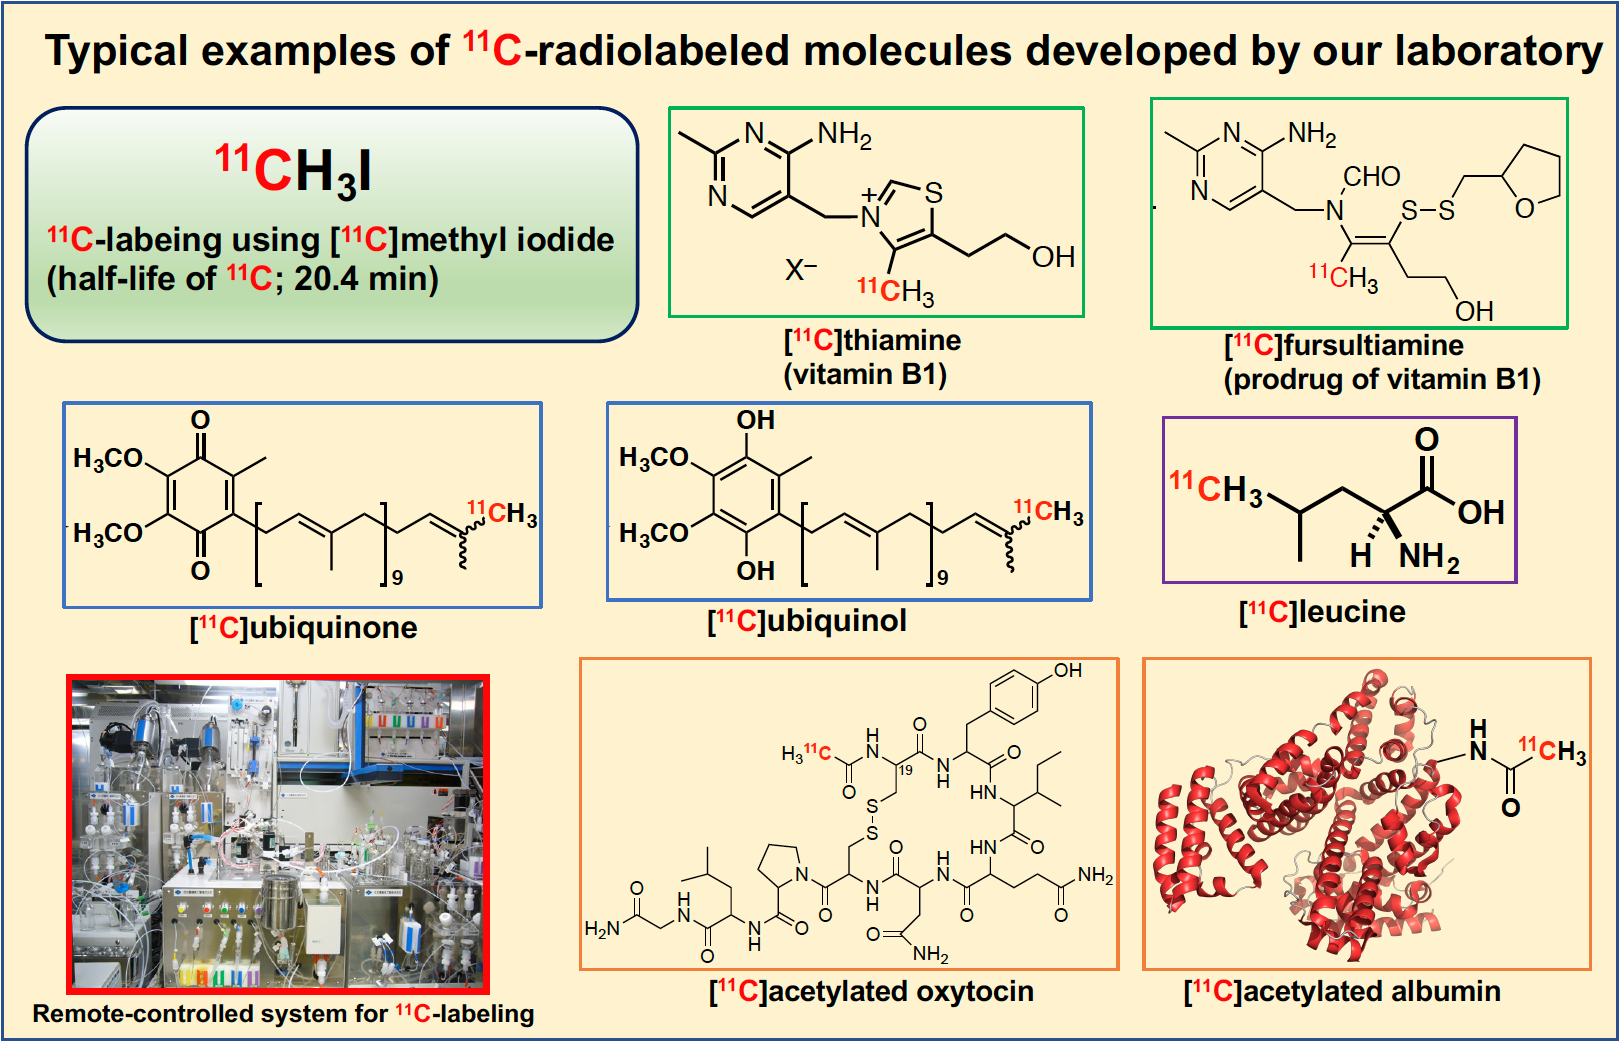 Typical examples of C-11-radiolabeled molecules developed by our laboratory